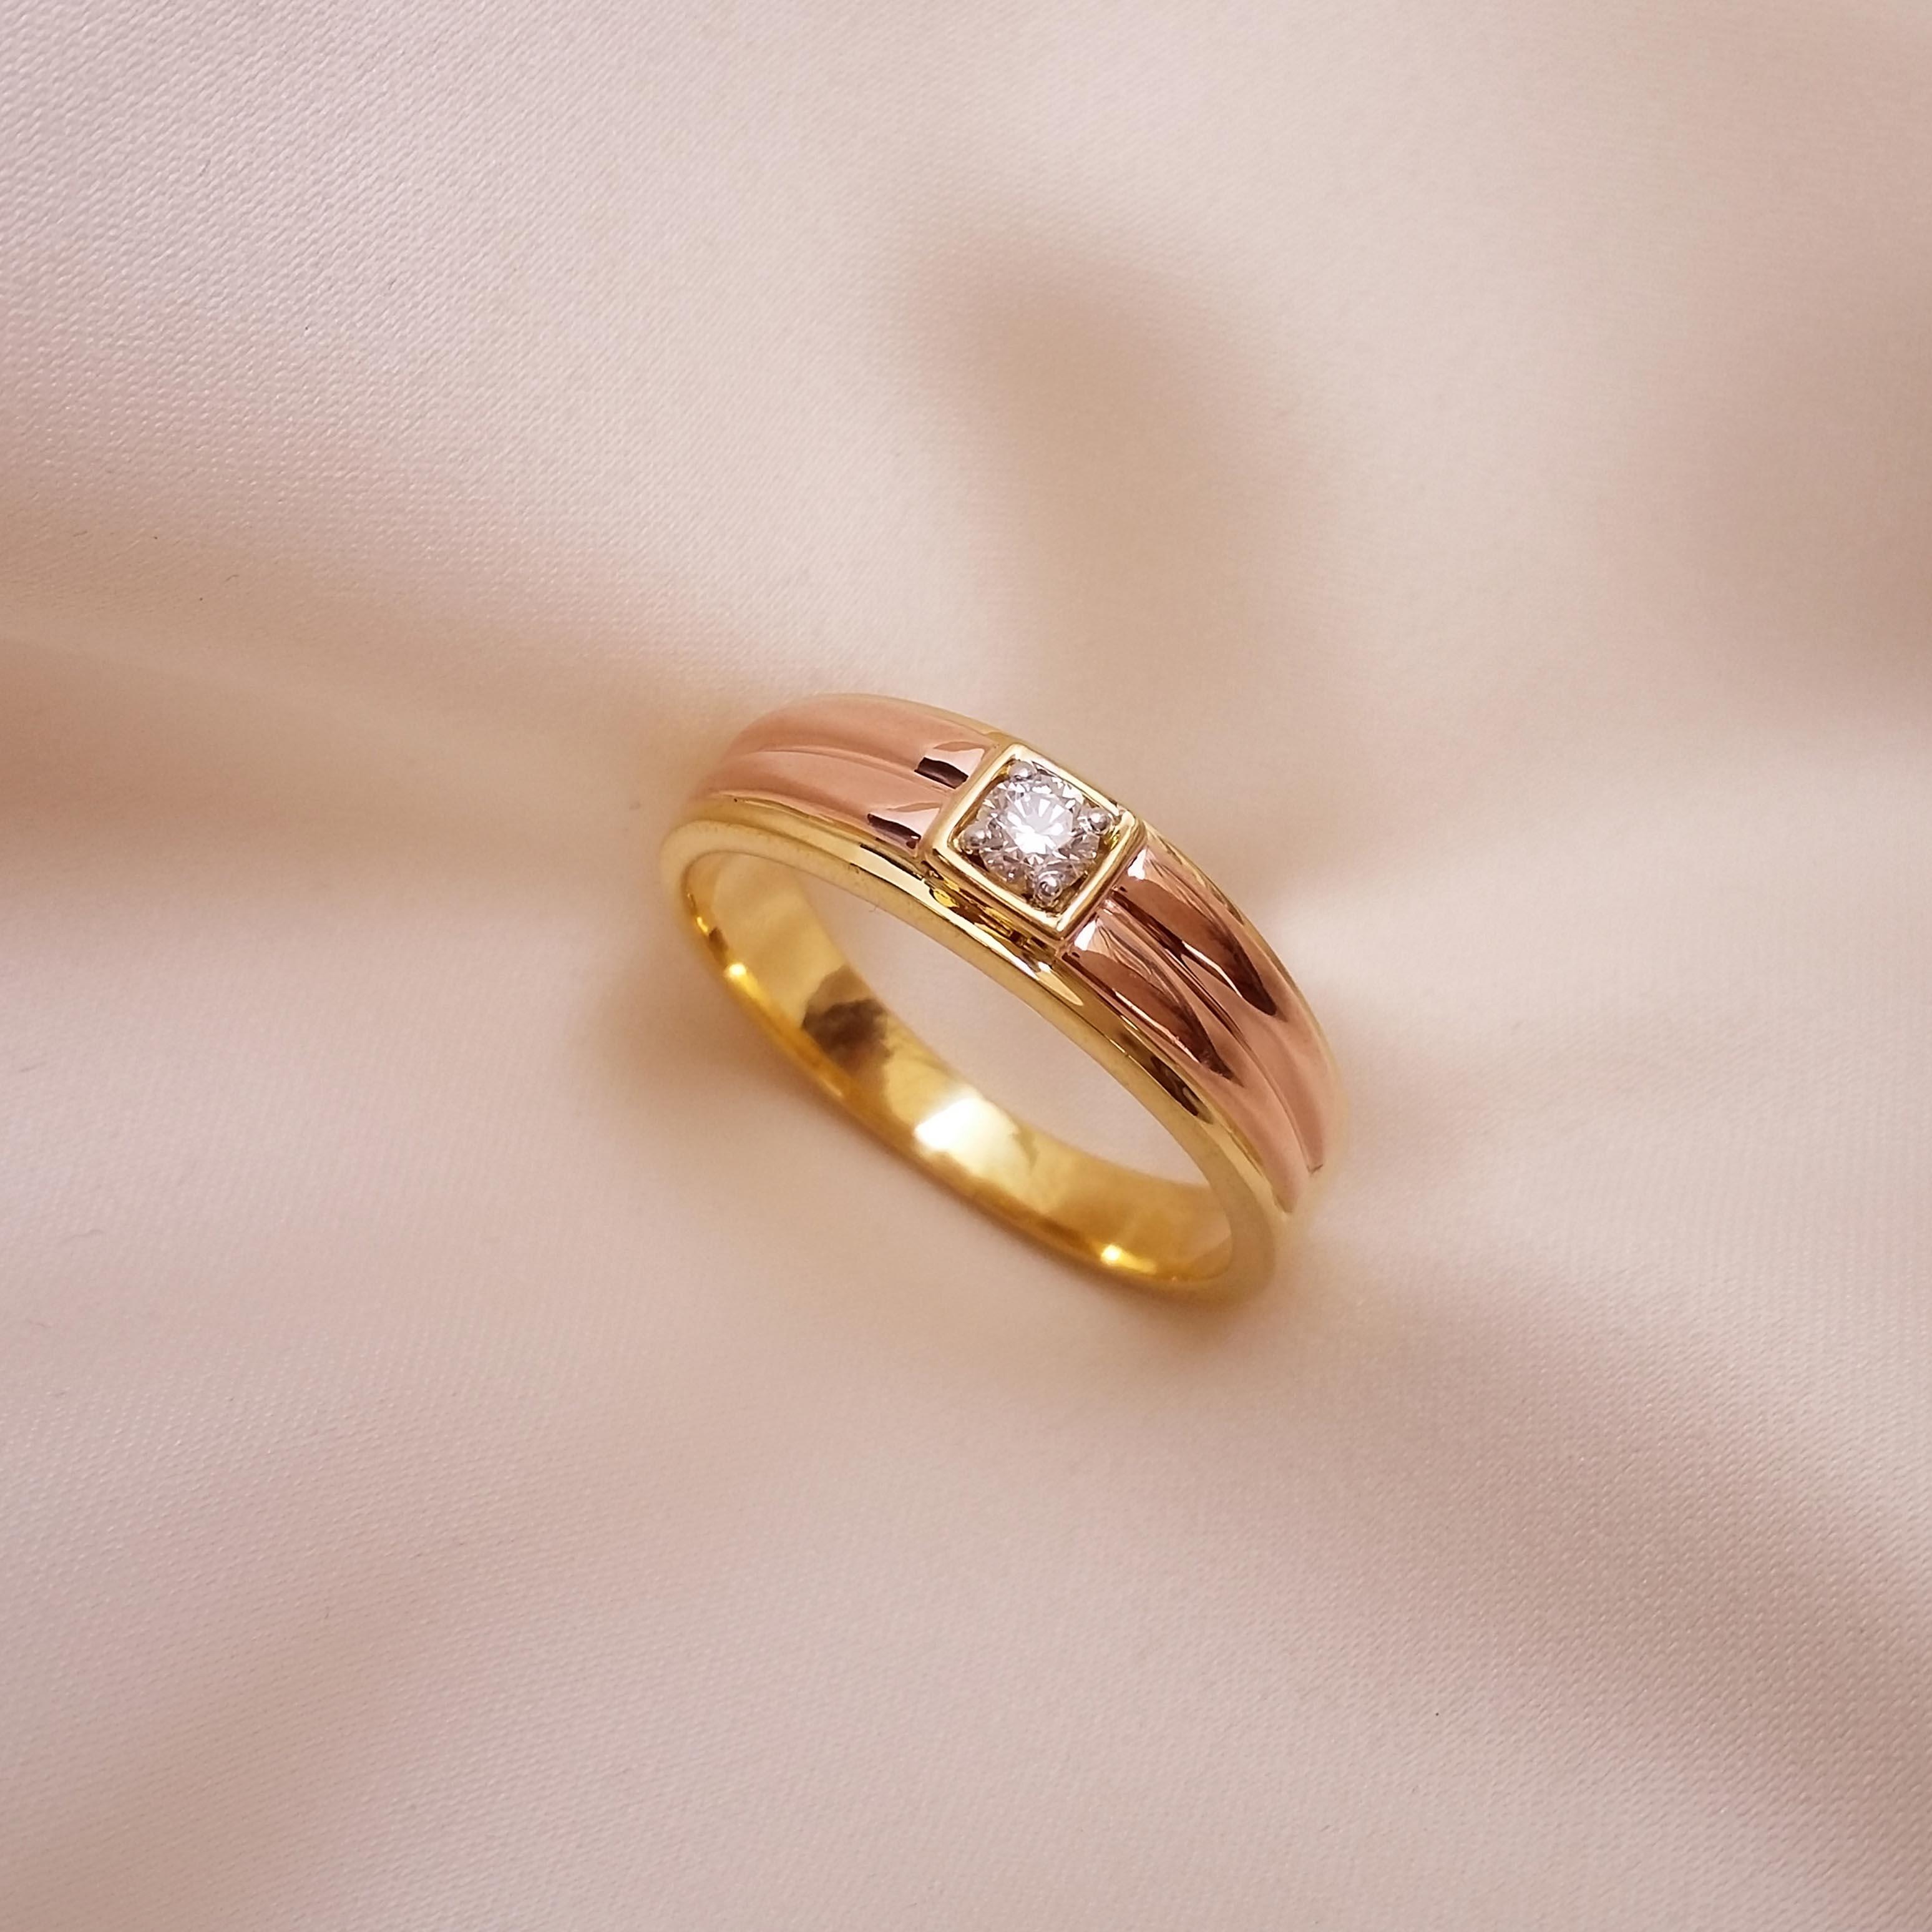 Buy Silver and Copper Ring online @ Best price in India - Rudra Centre